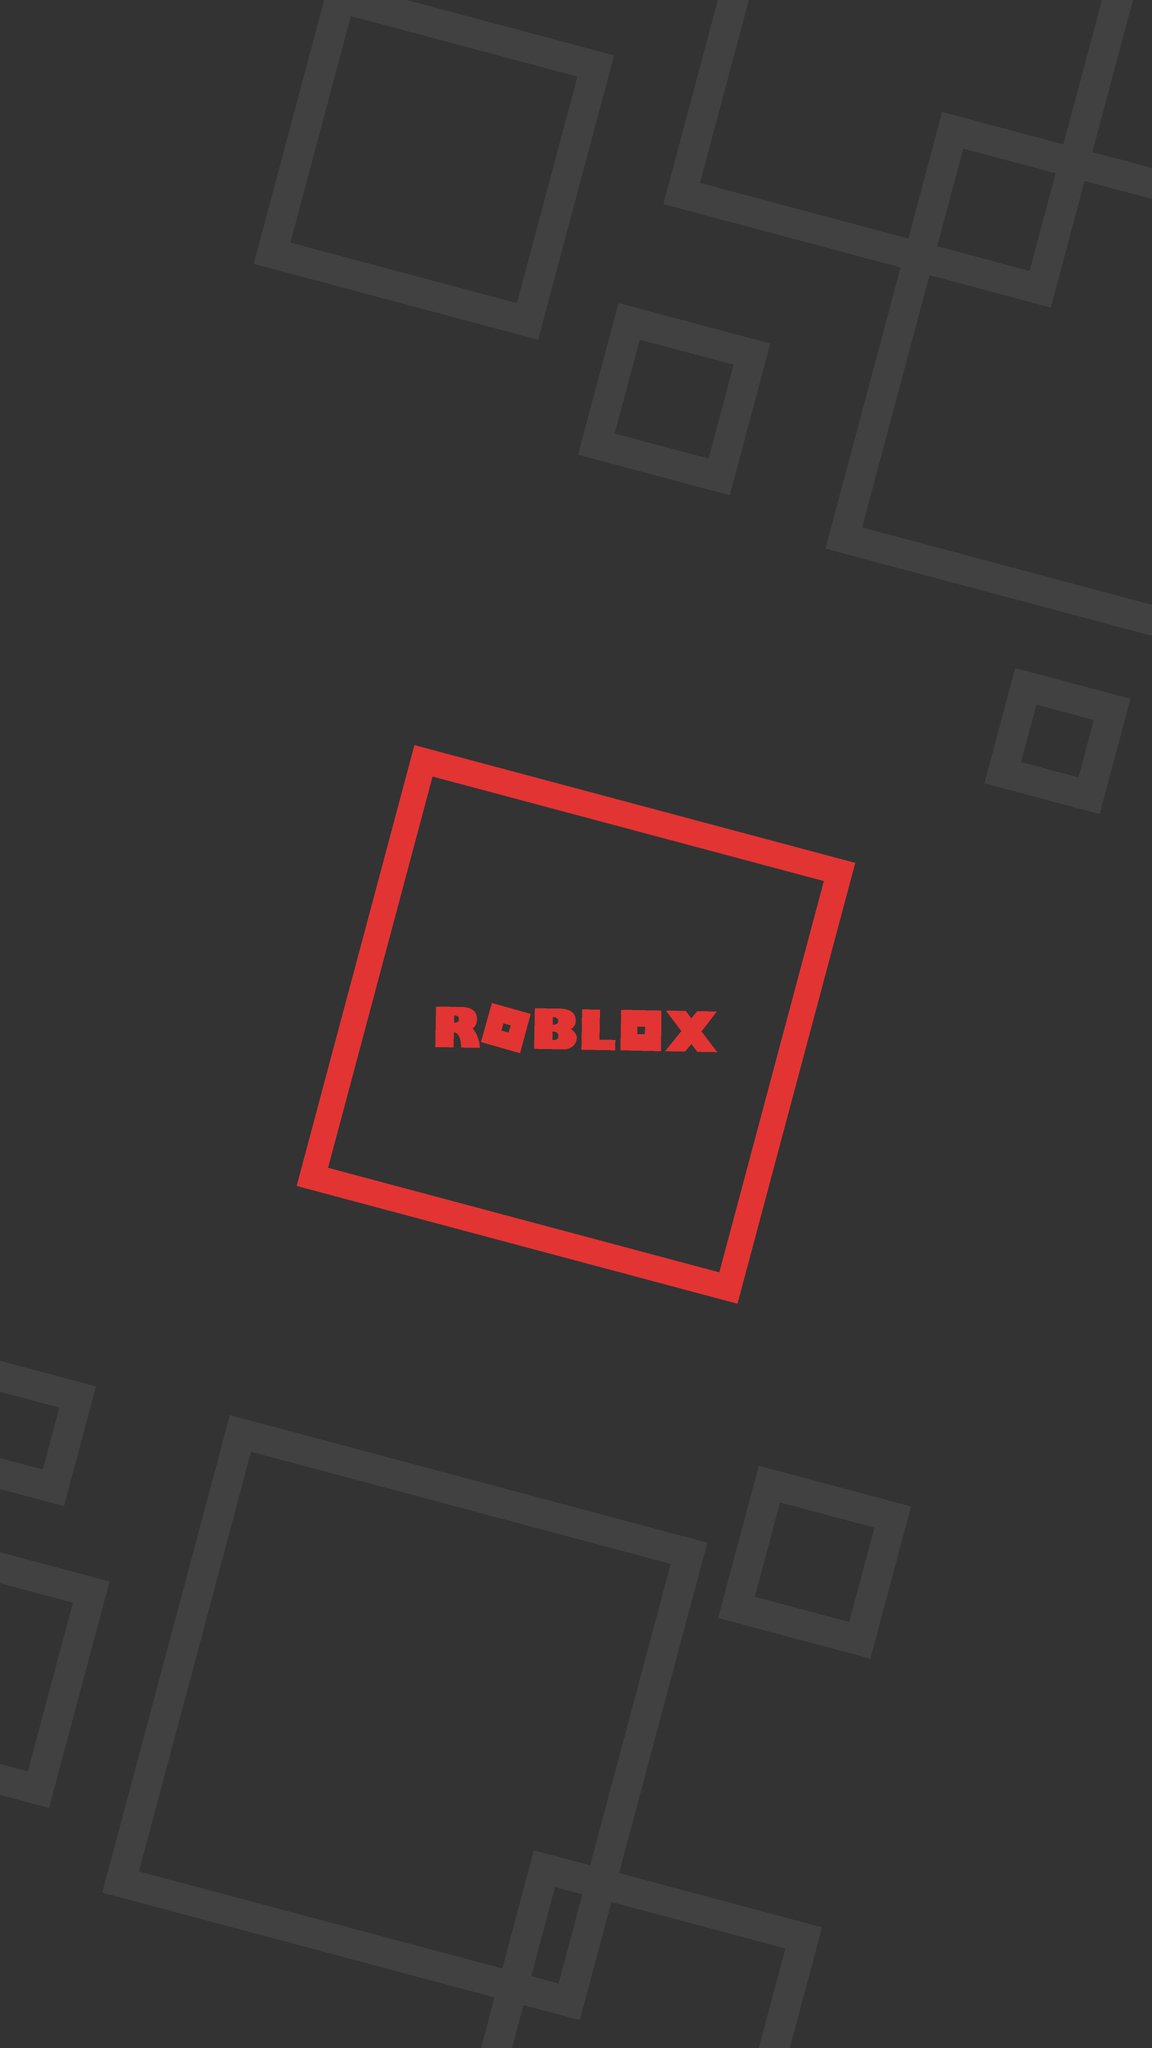 Crykee On Twitter Here S The Full Album Of Roblox Wallpapers I - crykee on twitter heres the full album of roblox